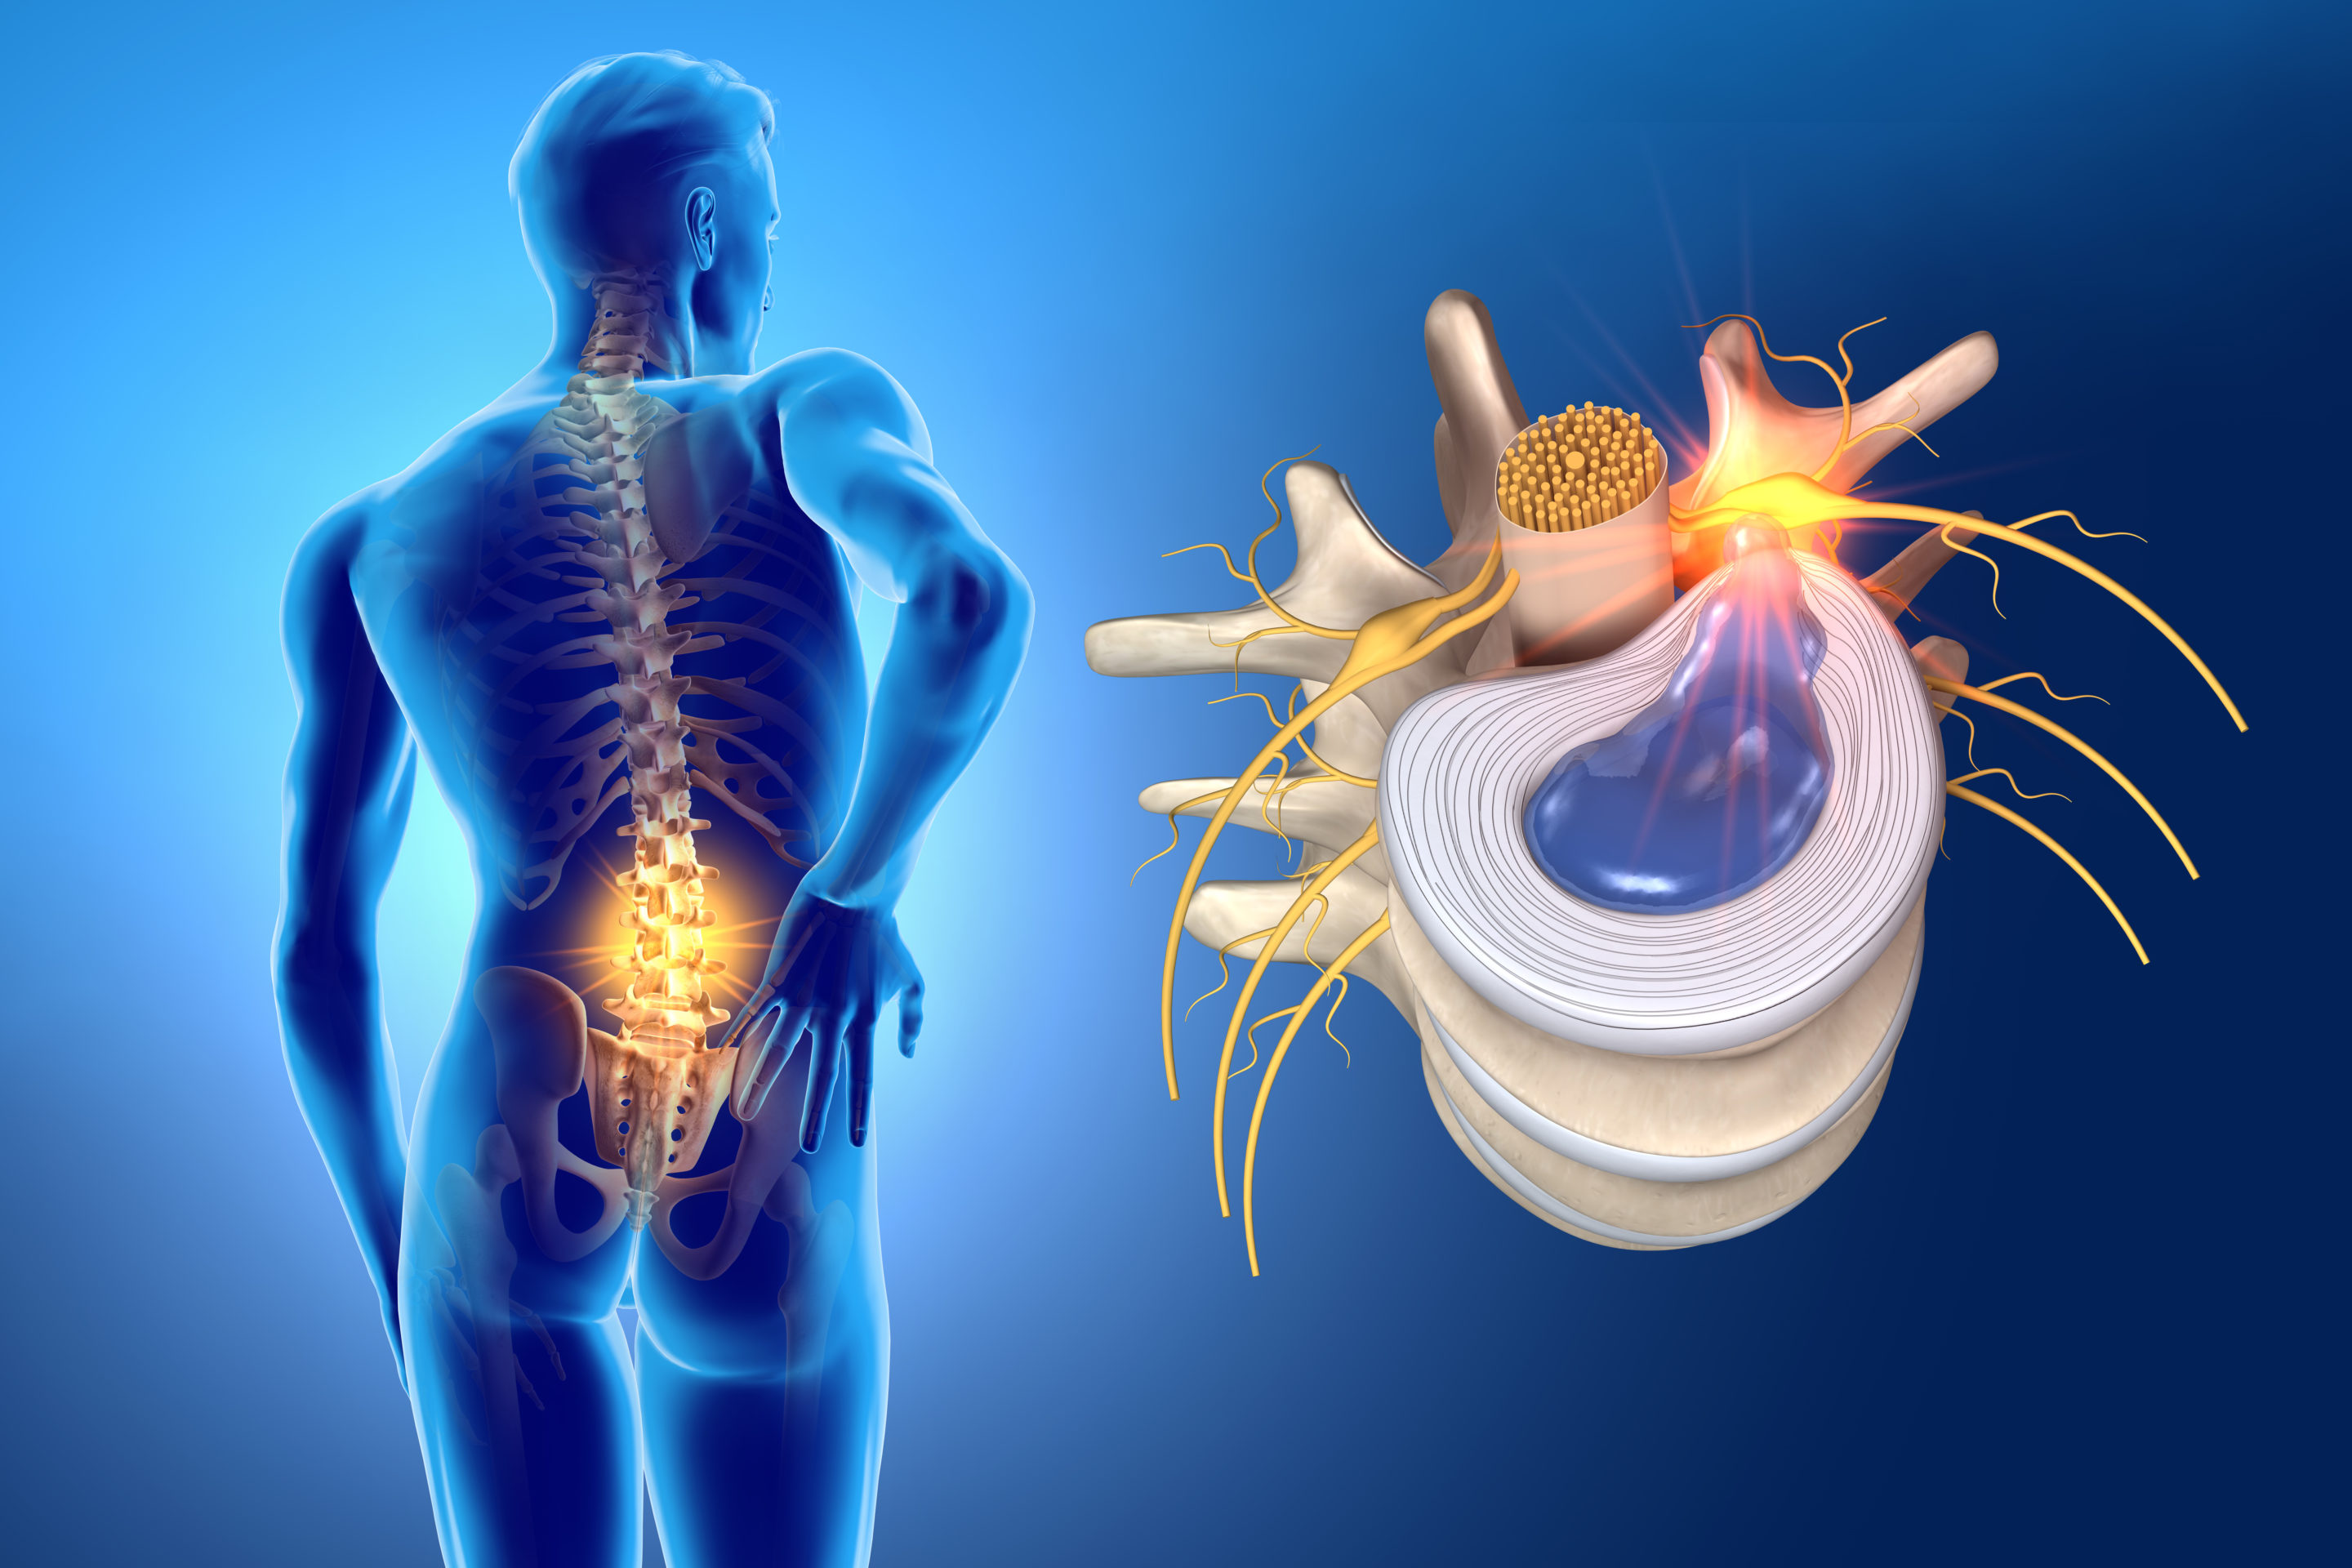 What is Lumbar Disc Herniation/Sciatica & How to Manage It? - Upswing Health